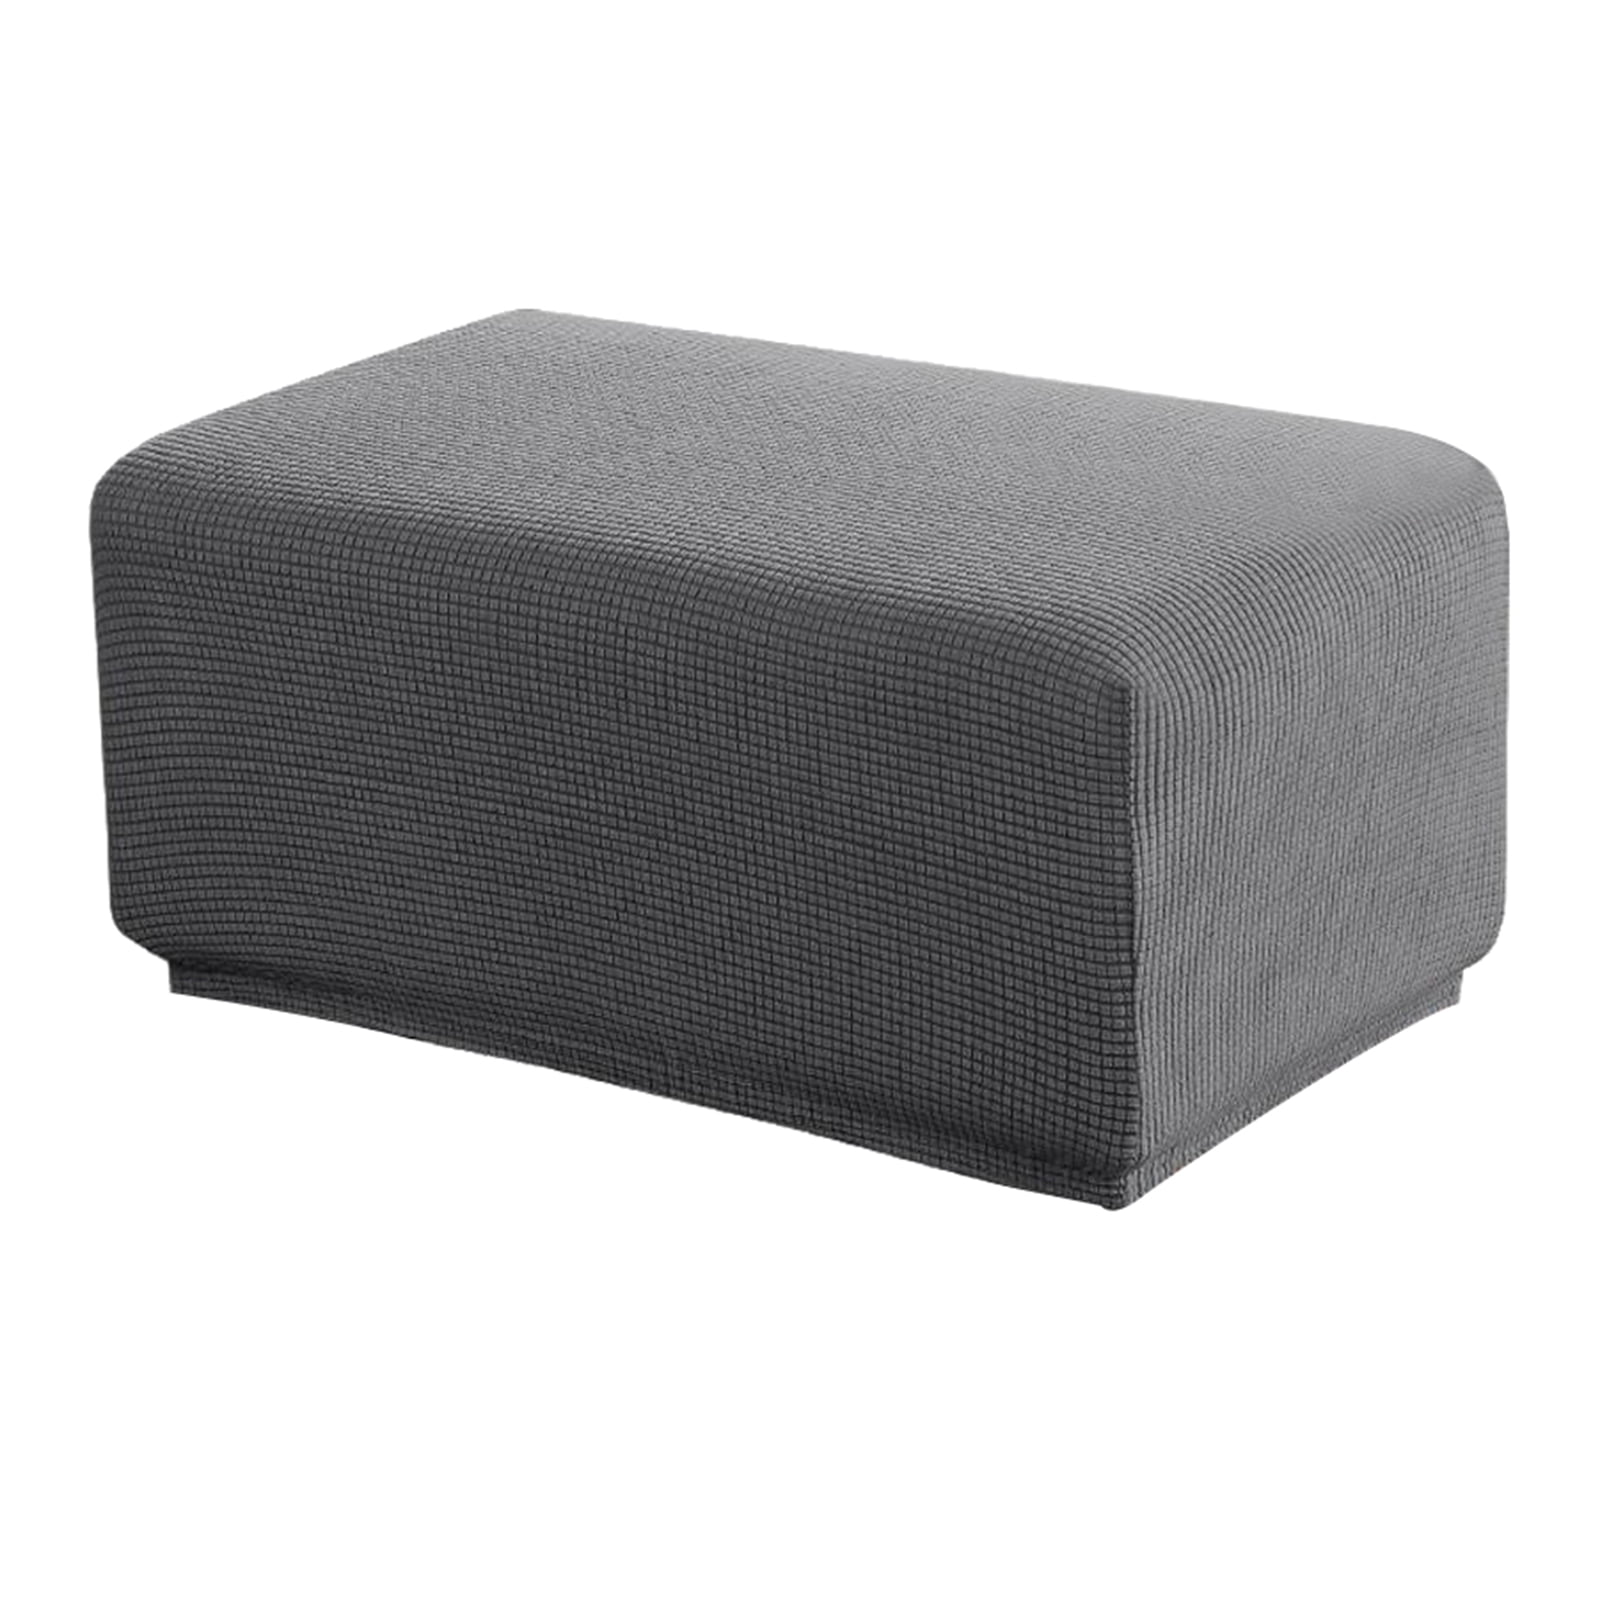 Baoblaze Ottoman Covers Slipcover Polyester Ottoman Slipcover Rectangle Ottoman Protector Cover for Foot Stool Footrest Furniture Stretch Beige